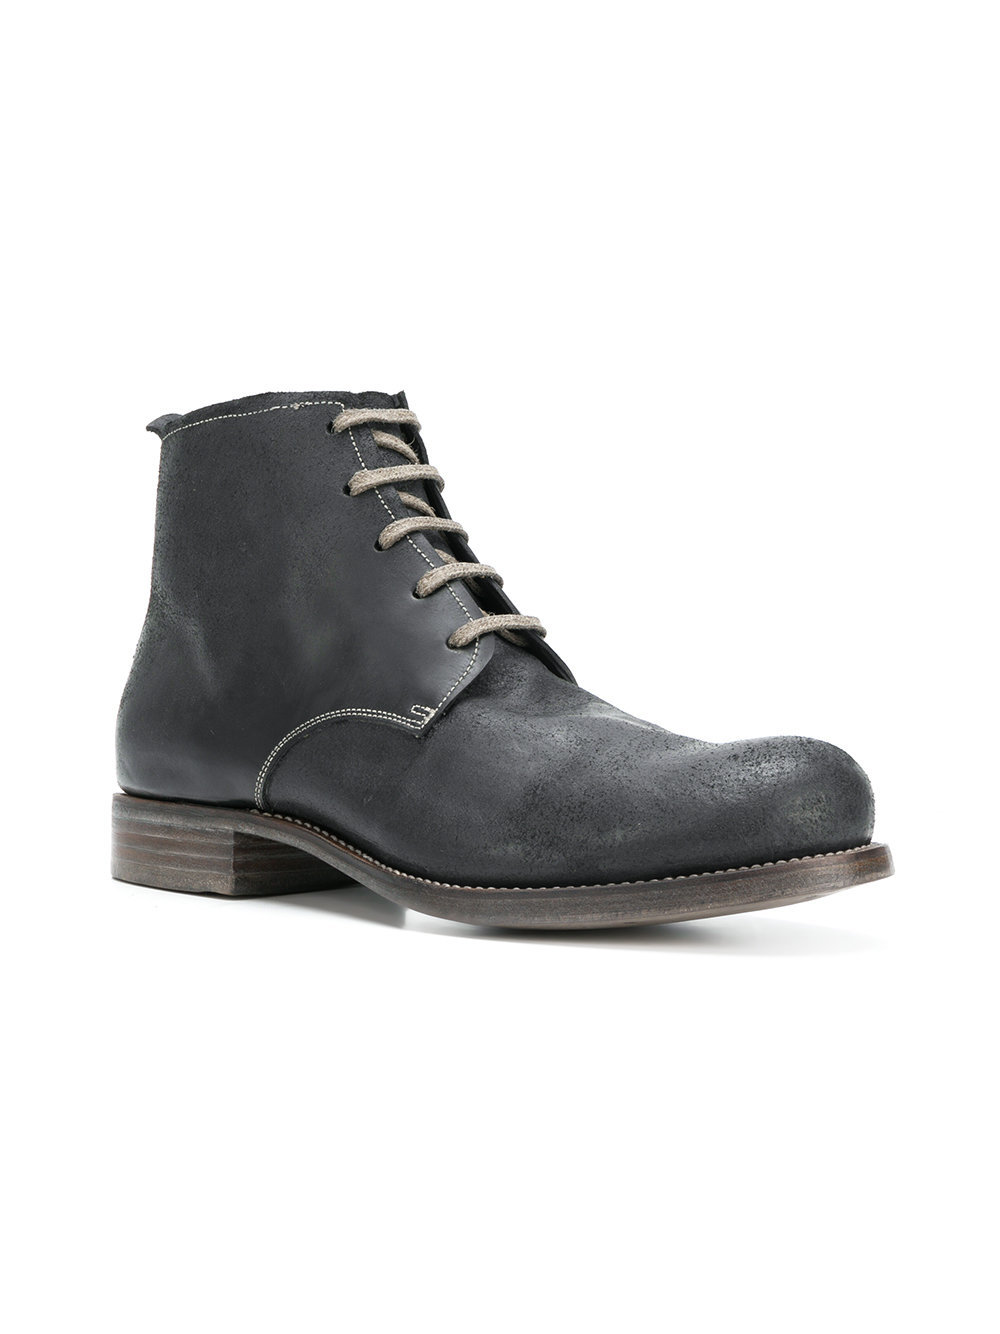 Dimissianos & Miller Lace Up Ankle Boots, $1,746 | farfetch.com